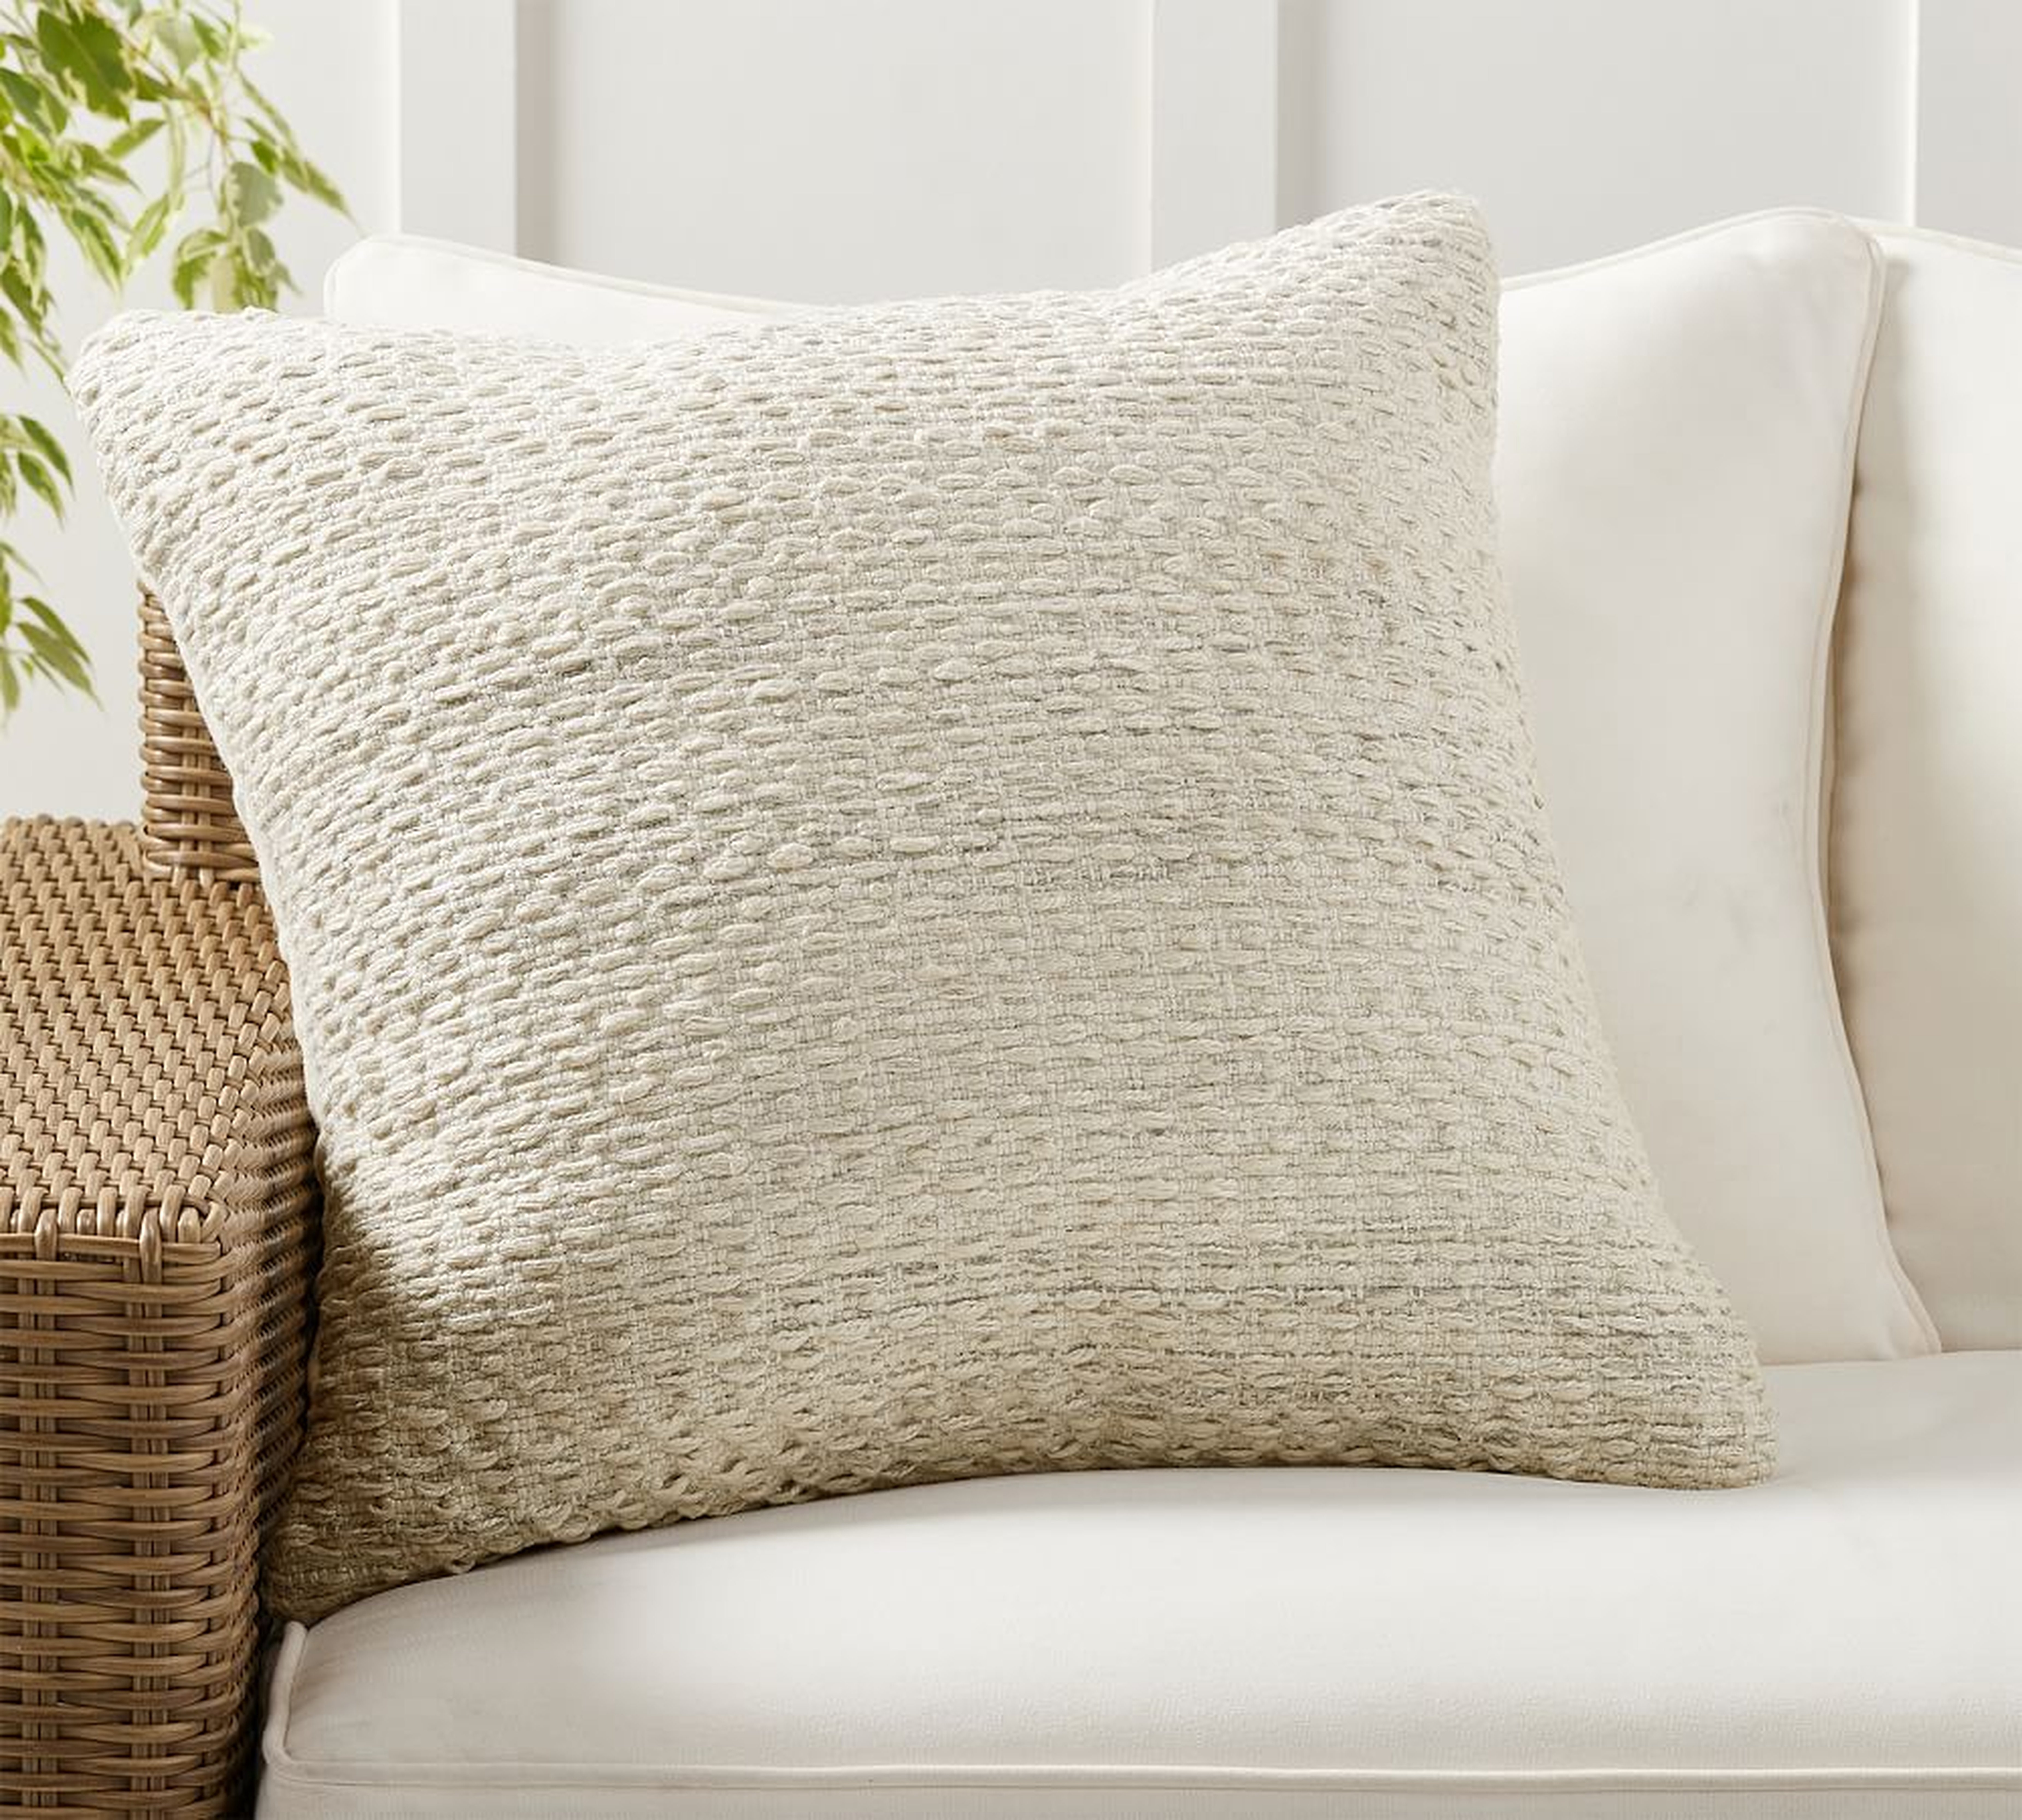 Seascape Indoor/Outdoor Textured Pillow, 24" x 24", Ivory Multi - Pottery Barn